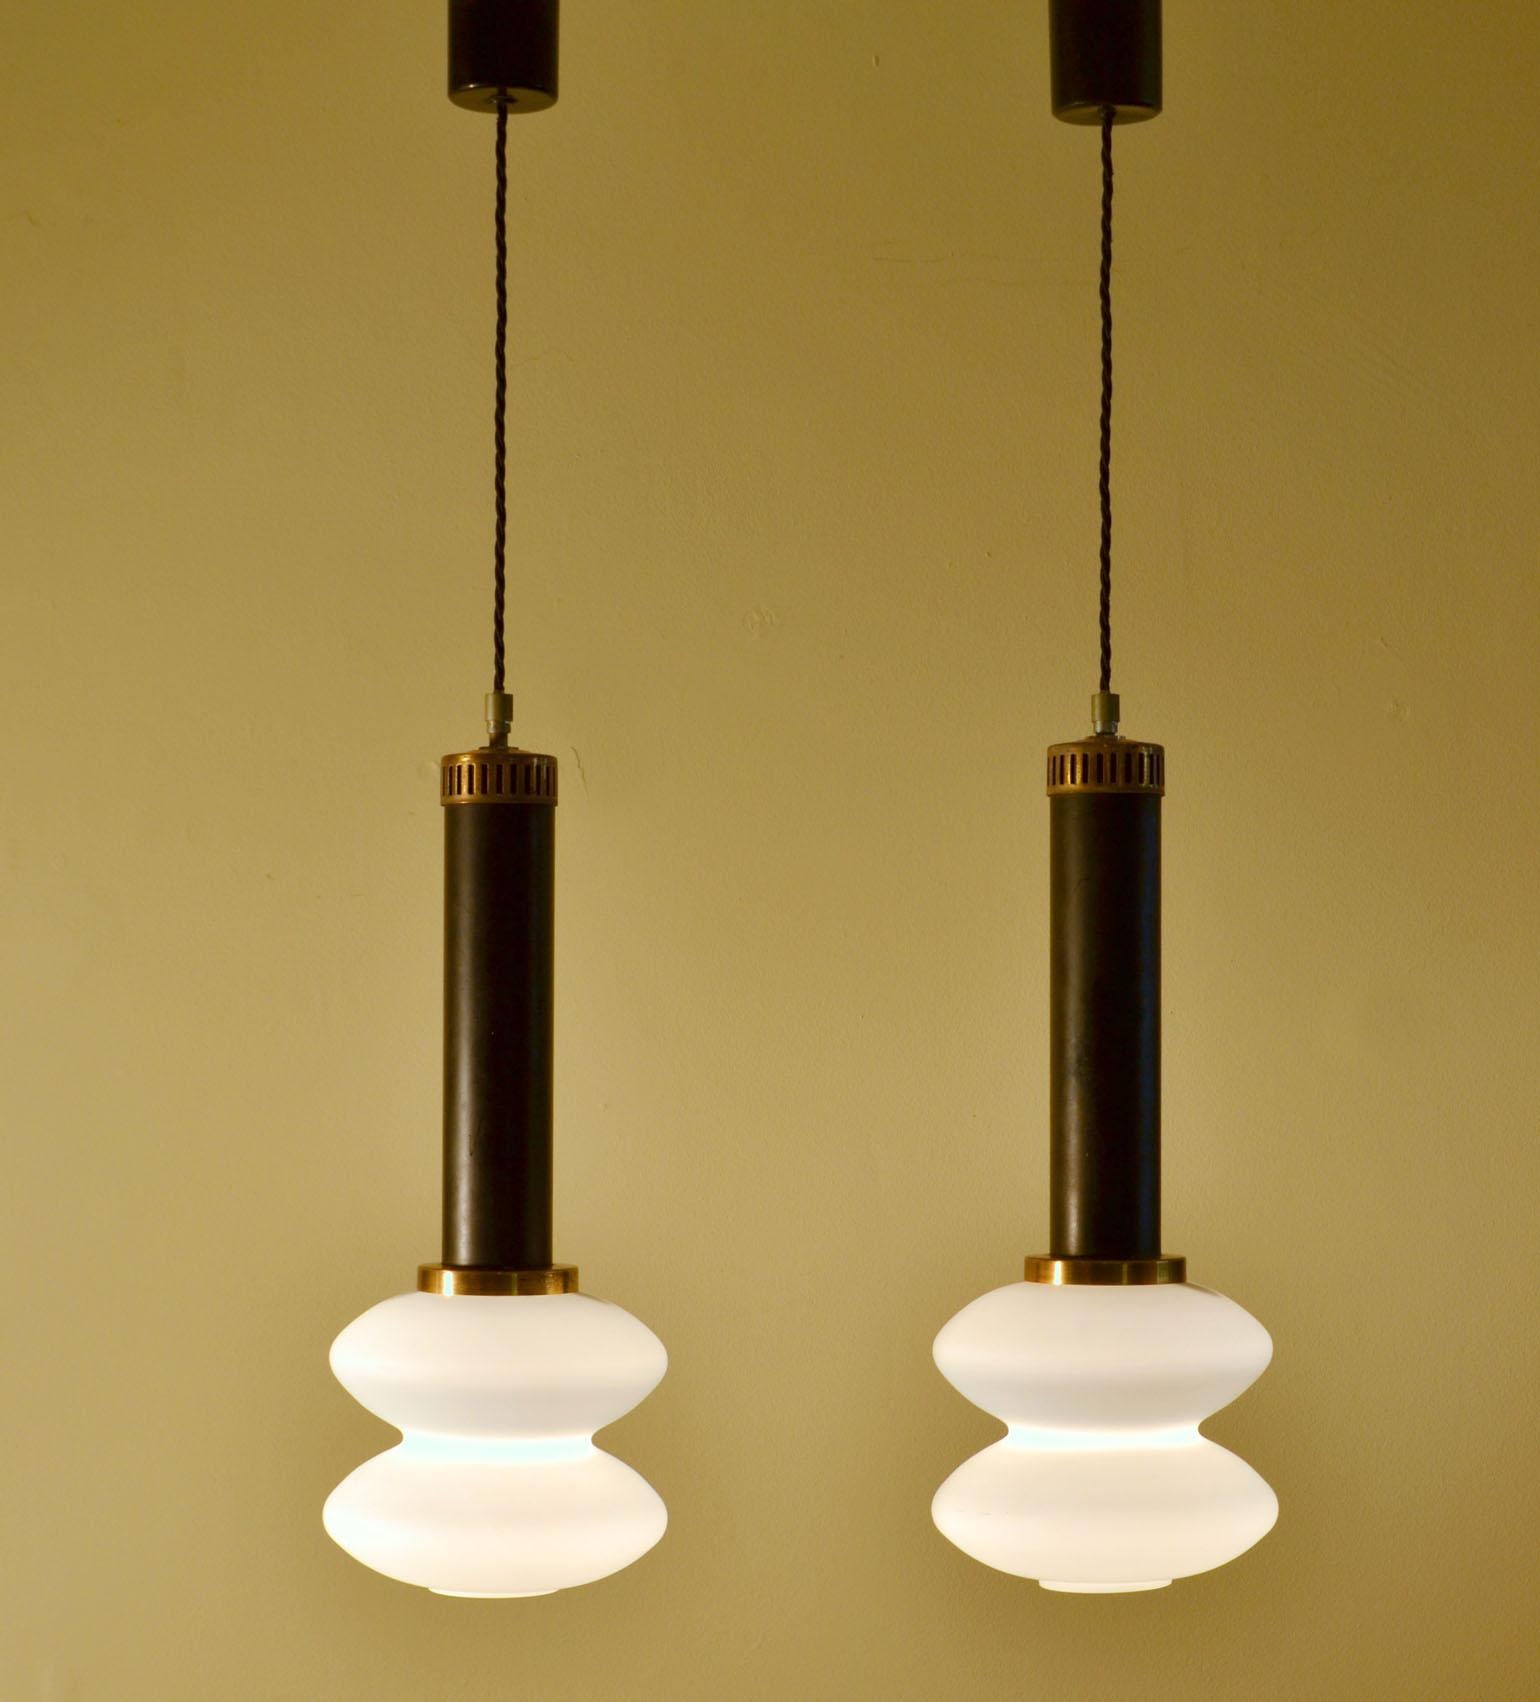 Pair of hand blown opaline diffuser shade pendant lamps on black and brass stem by Stilnovo 1950s.
Modernist shaped pendant lamps with curvaceous conical shaped milk glass hand blown shades. The lamps give very nice diffused warm light when lit and